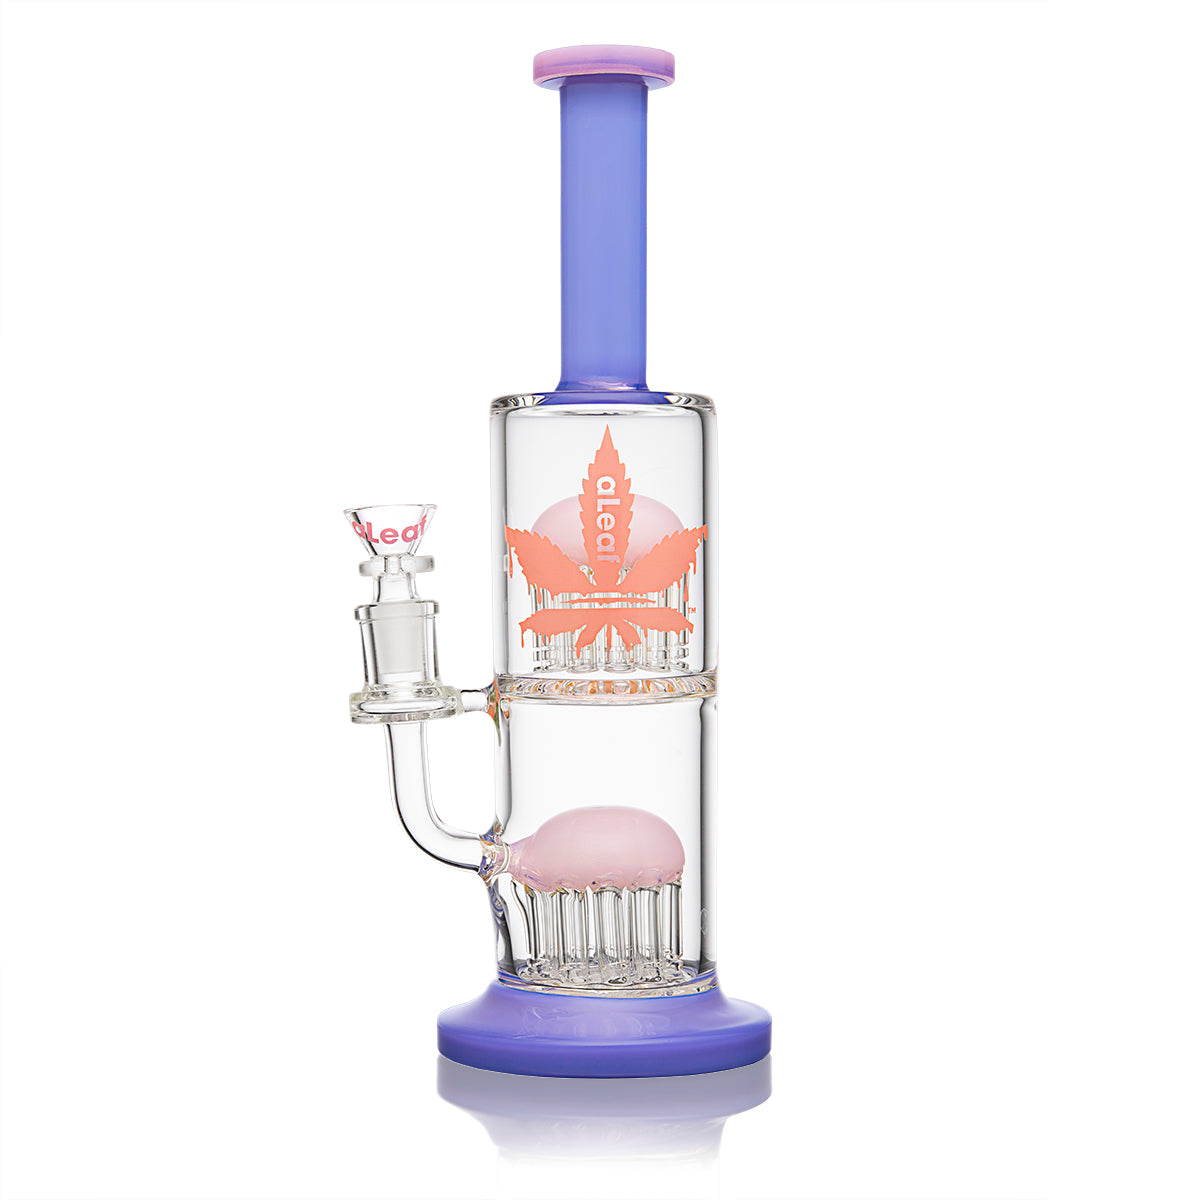 11 inch aLeaf Double Tree Perc Water Pipe